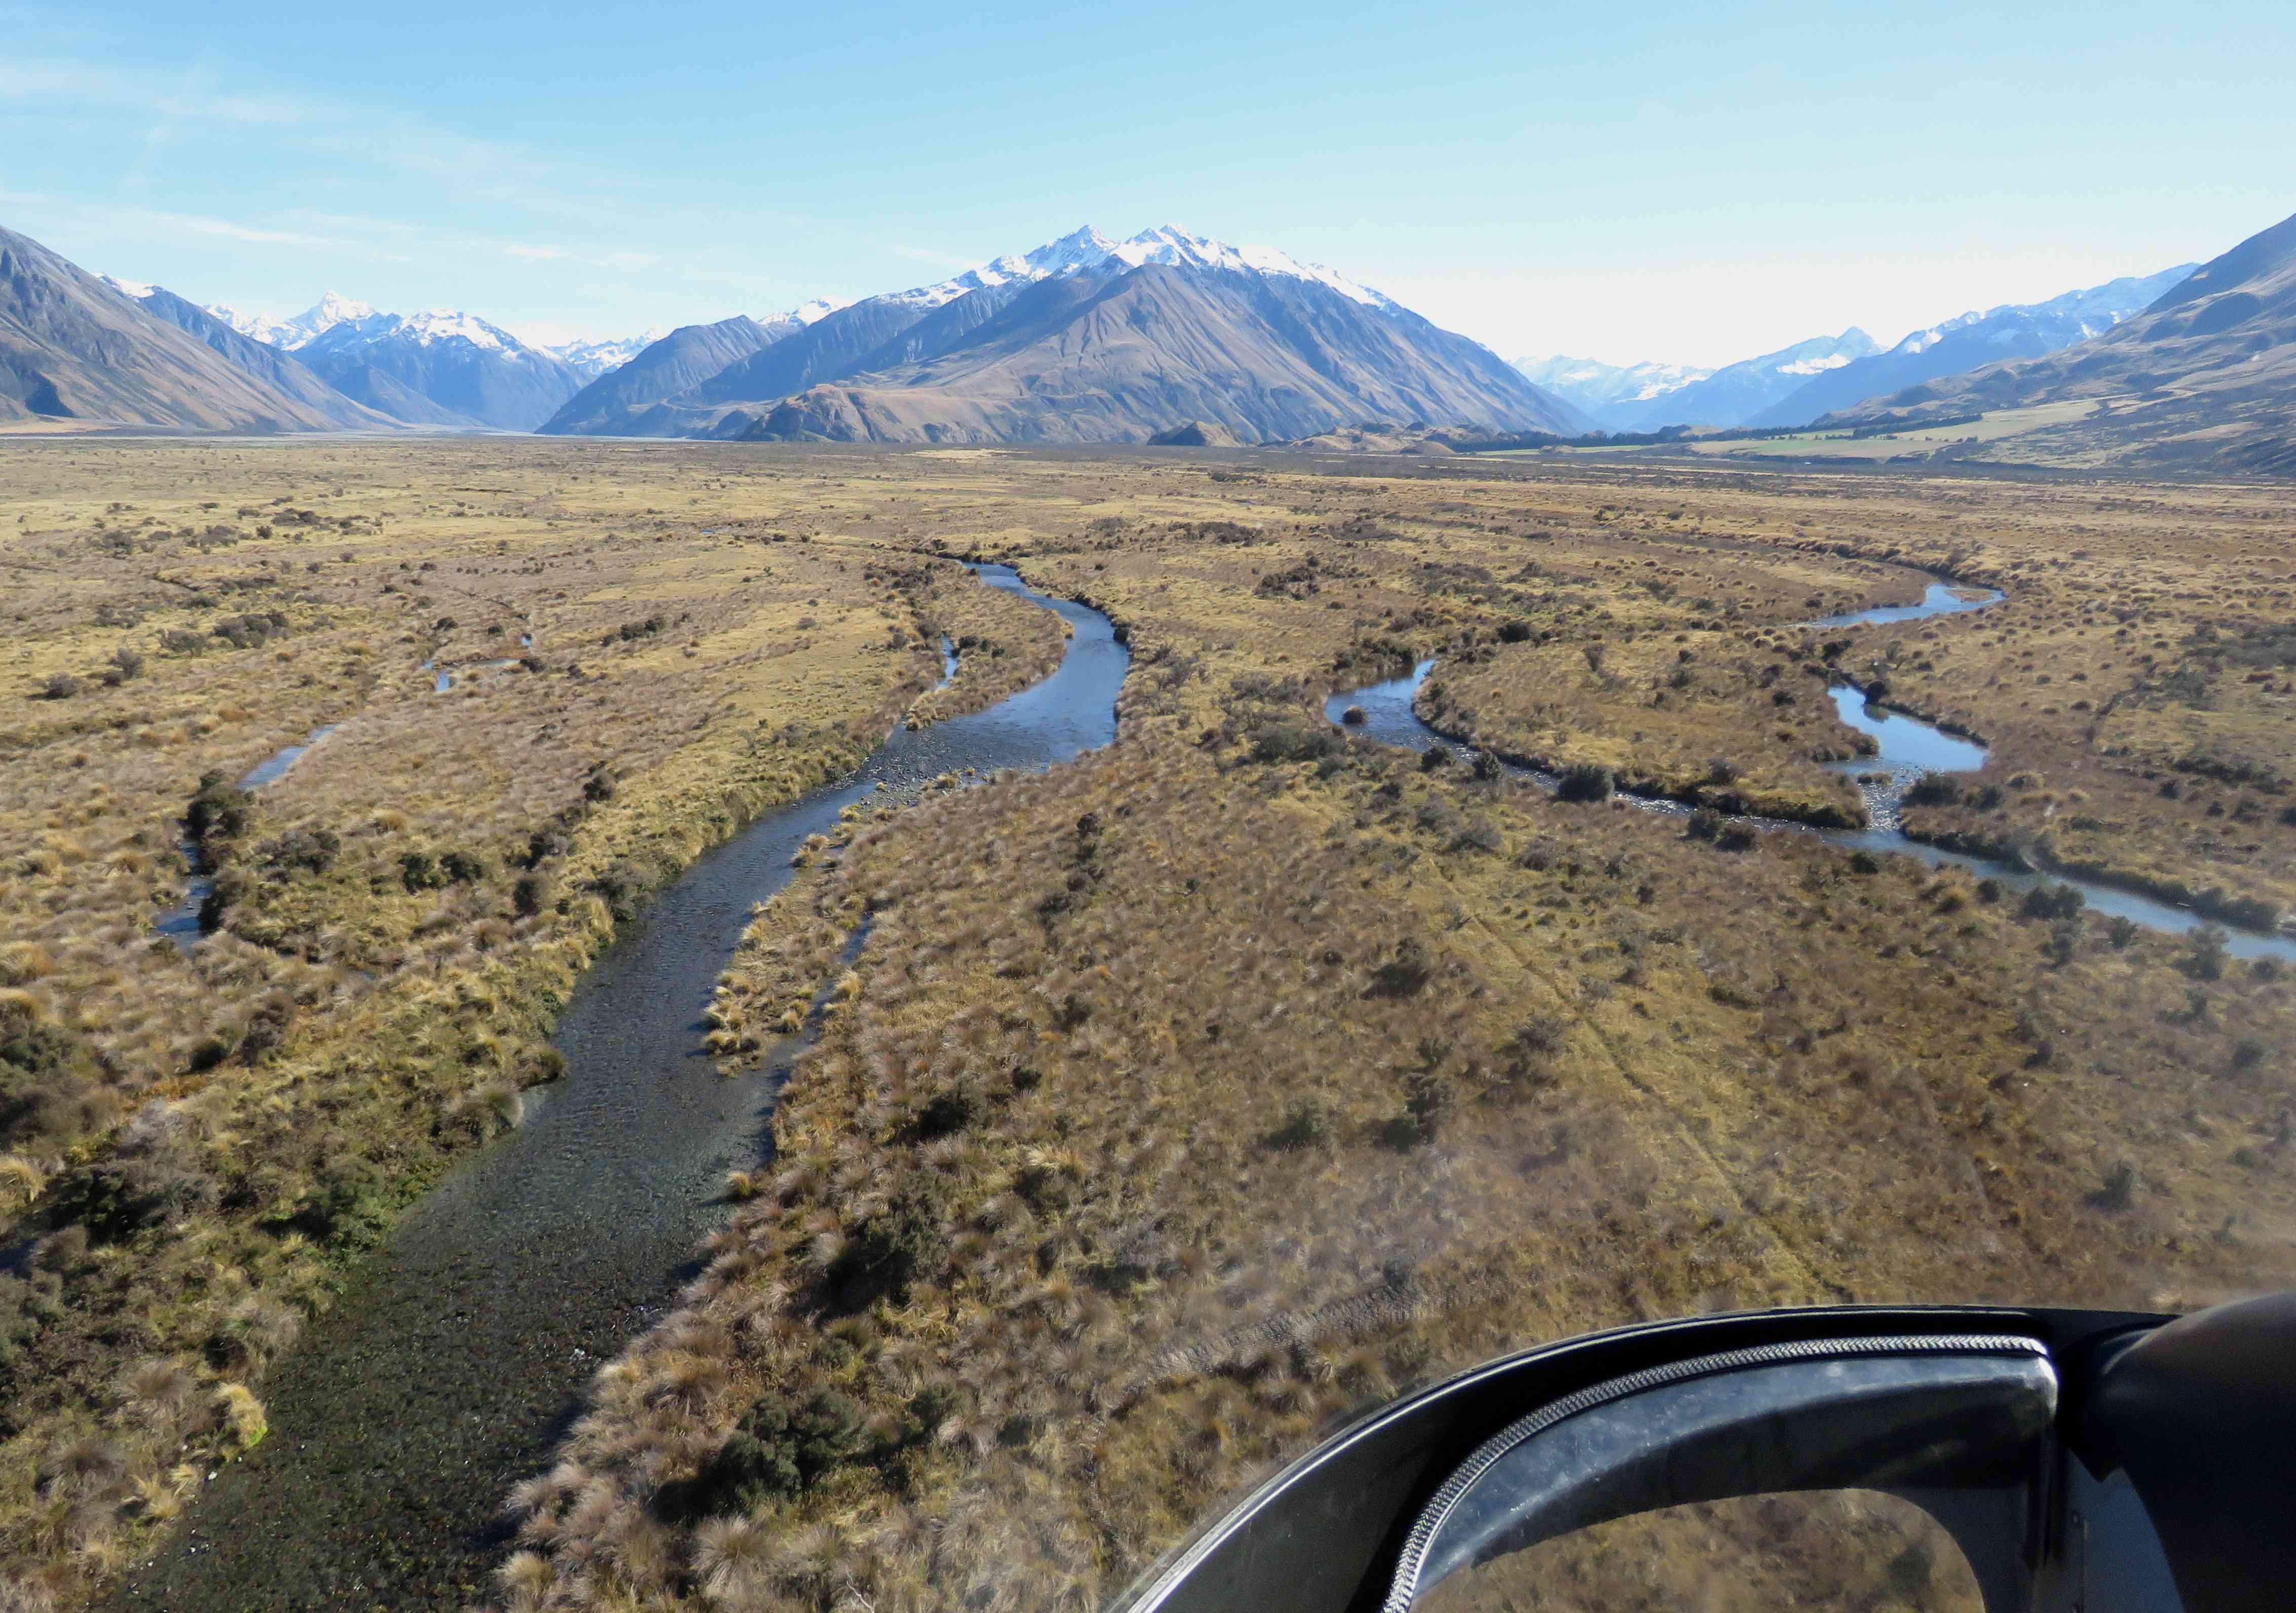 RL APRIL 2019 CSI The view while counting live spawning salmon in Rangitata River headwaters credit R Adams